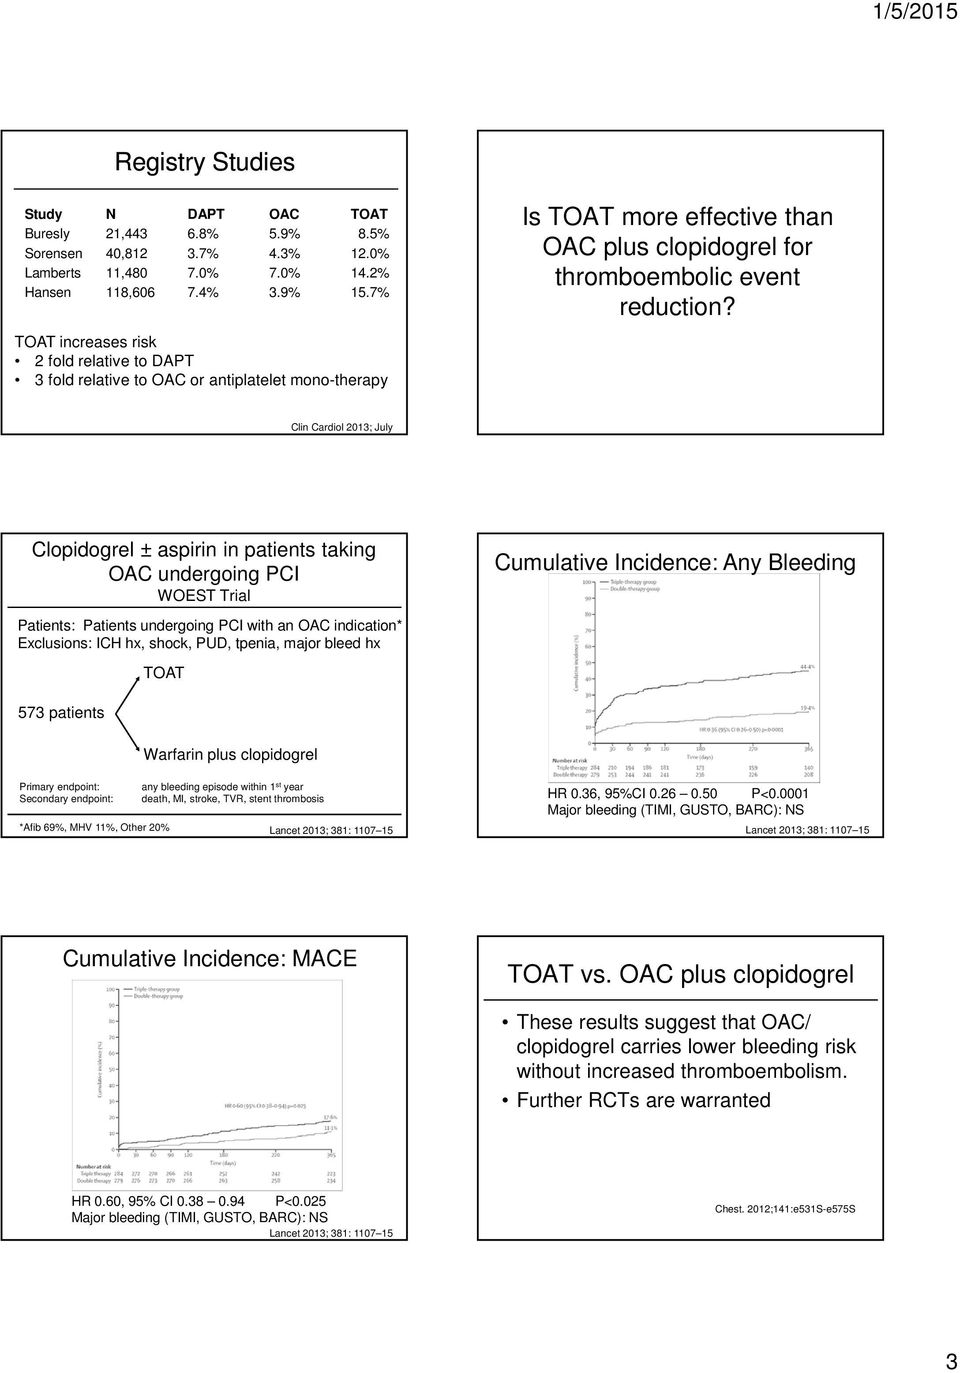 Clin Cardiol 2013; July Clopidogrel ± aspirin in patients taking OAC undergoing PCI WOEST Trial Cumulative Incidence: Any Bleeding Patients: Patients undergoing PCI with an OAC indication*